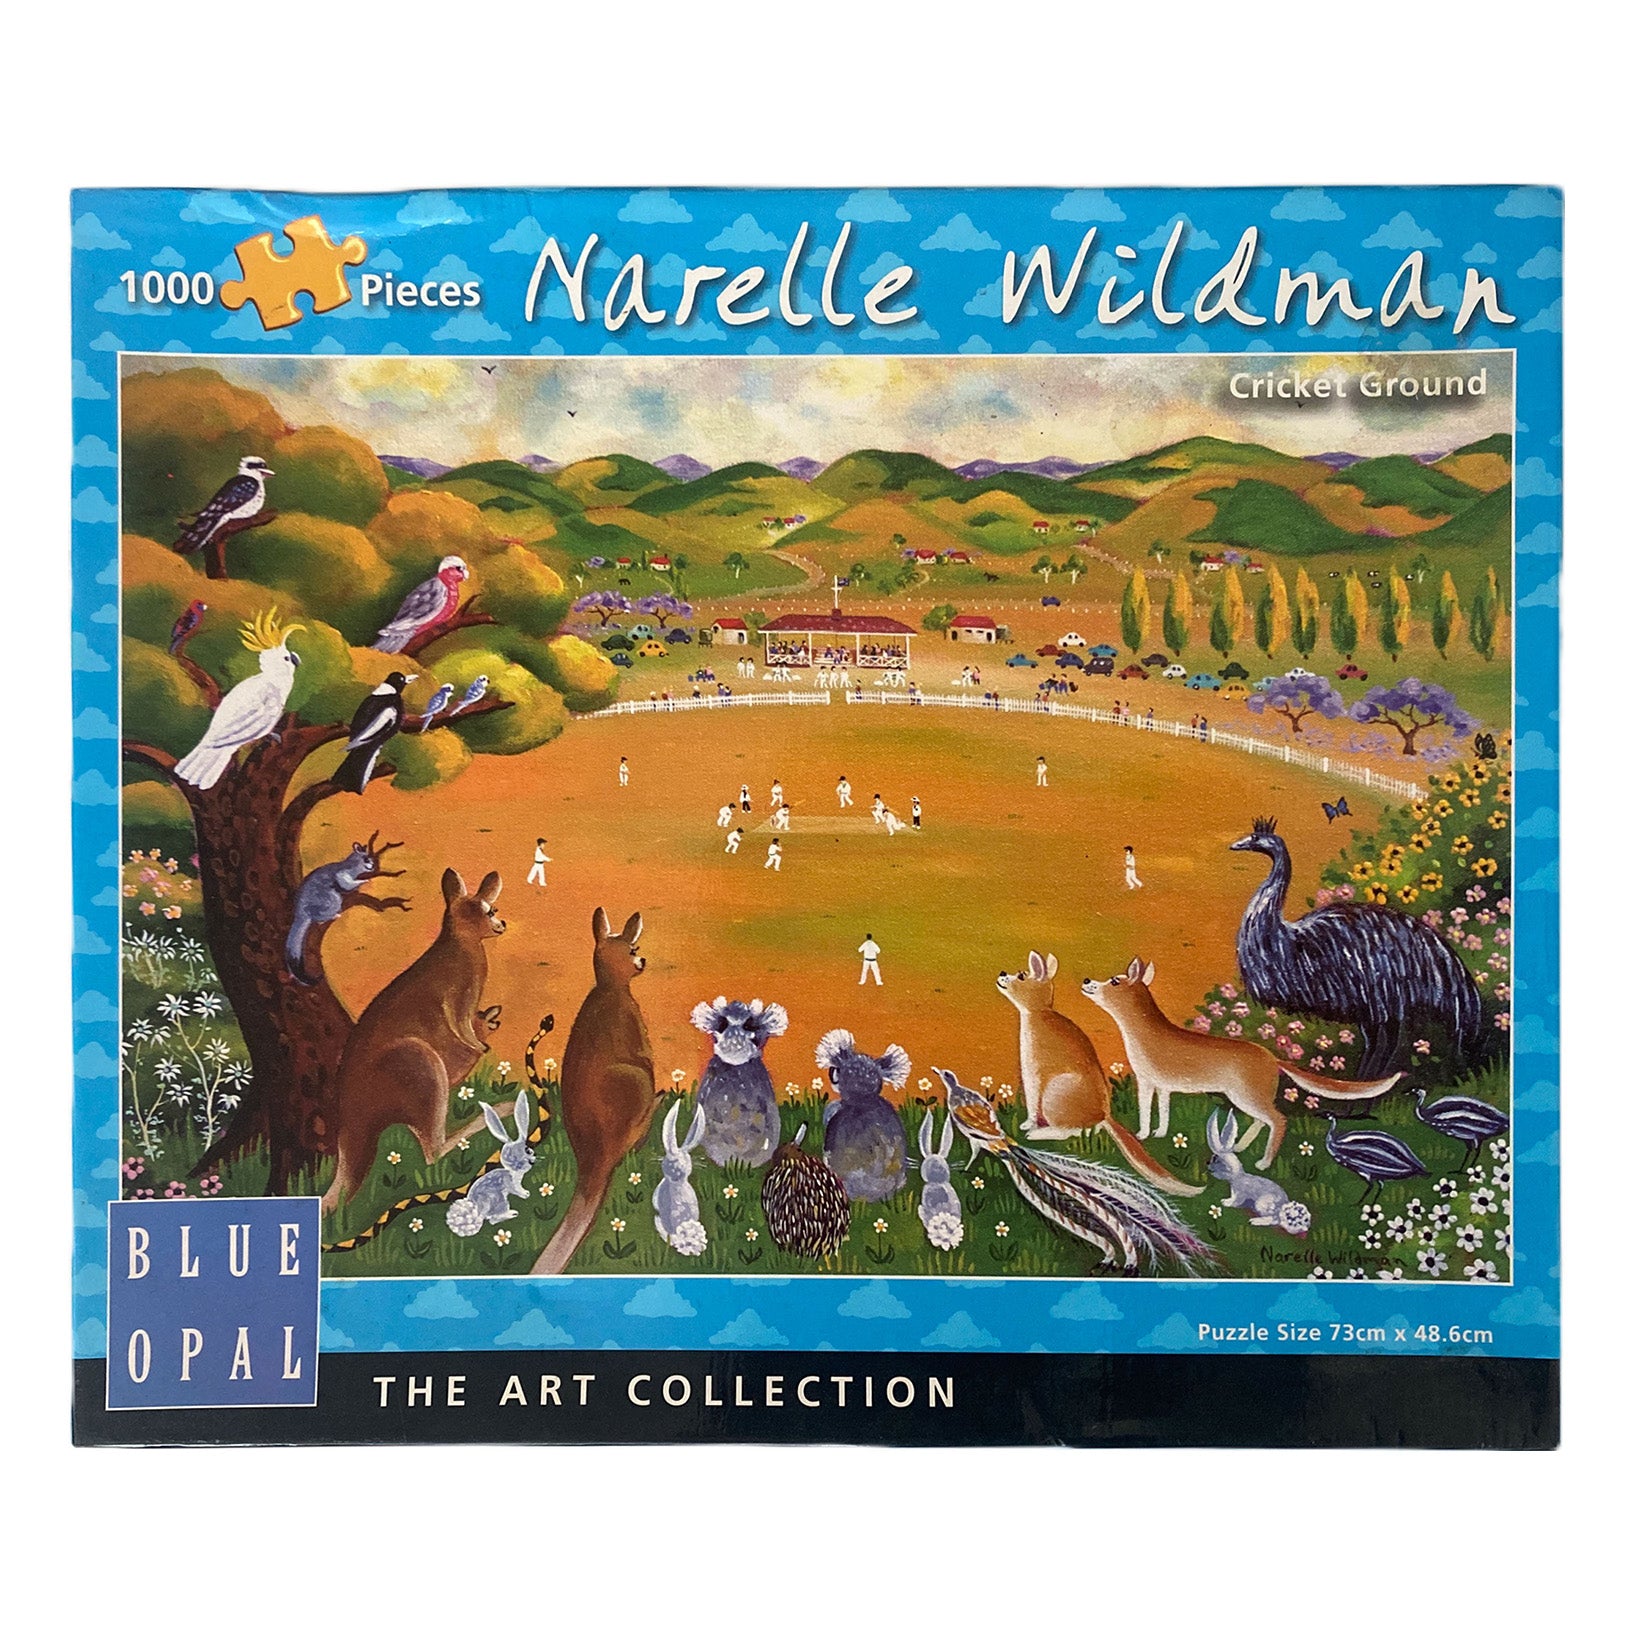 Photo of box of Cricket Ground Blue Opal Puzzle with art by Narelle Wildman.